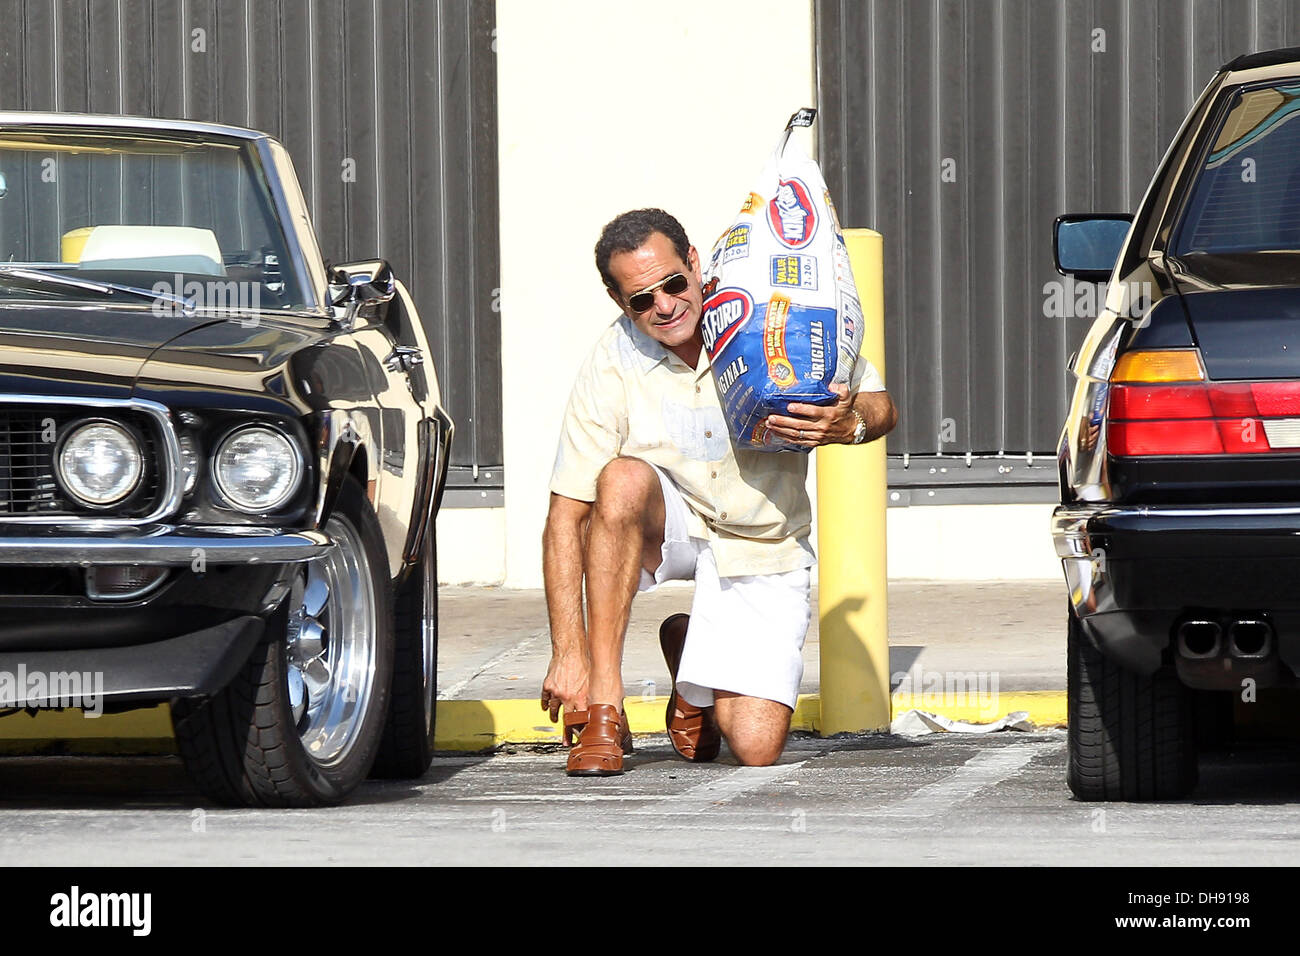 Tony Shalhoub on set of 'Pain and Gain' a new movie about a pair of bodybuilders who get caught up in an extortion and Stock Photo